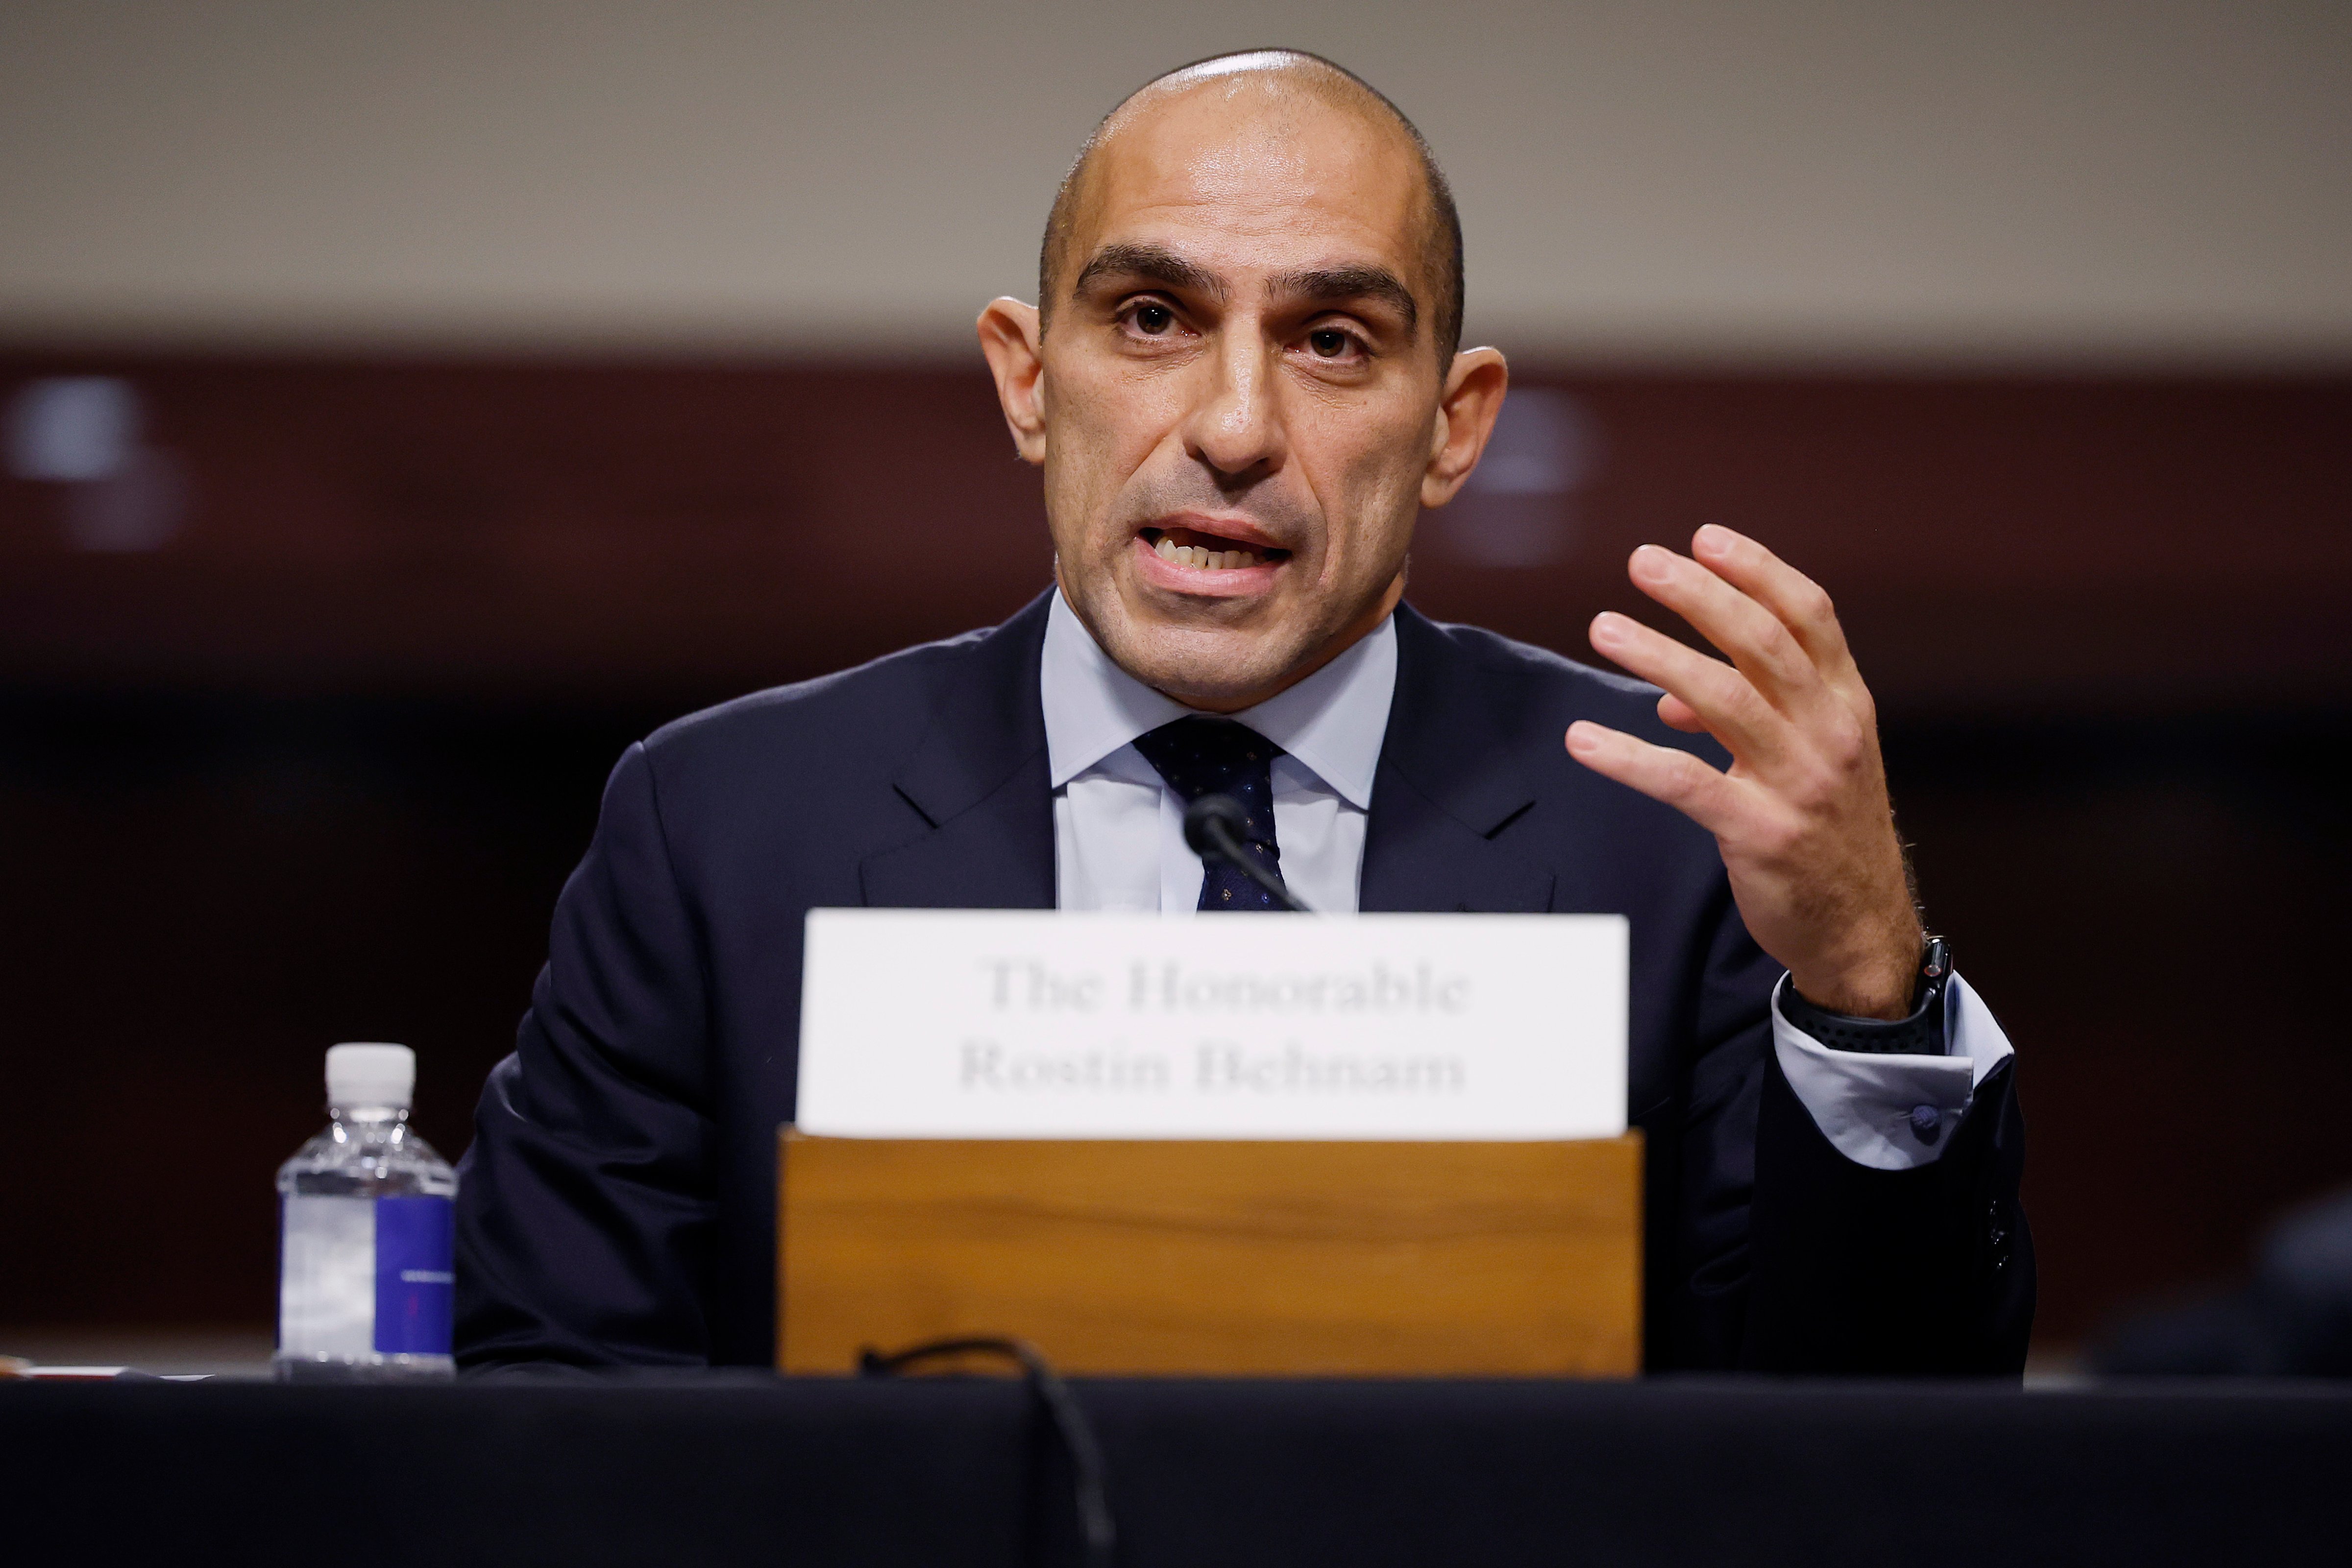 Commodity Futures Trading Commission Chairman Rostin Behnam testifies about the collapse of FTX before the Senate Agriculture Committee in December 2022 in Washington, DC. (Chip Somodevilla—Getty Images)